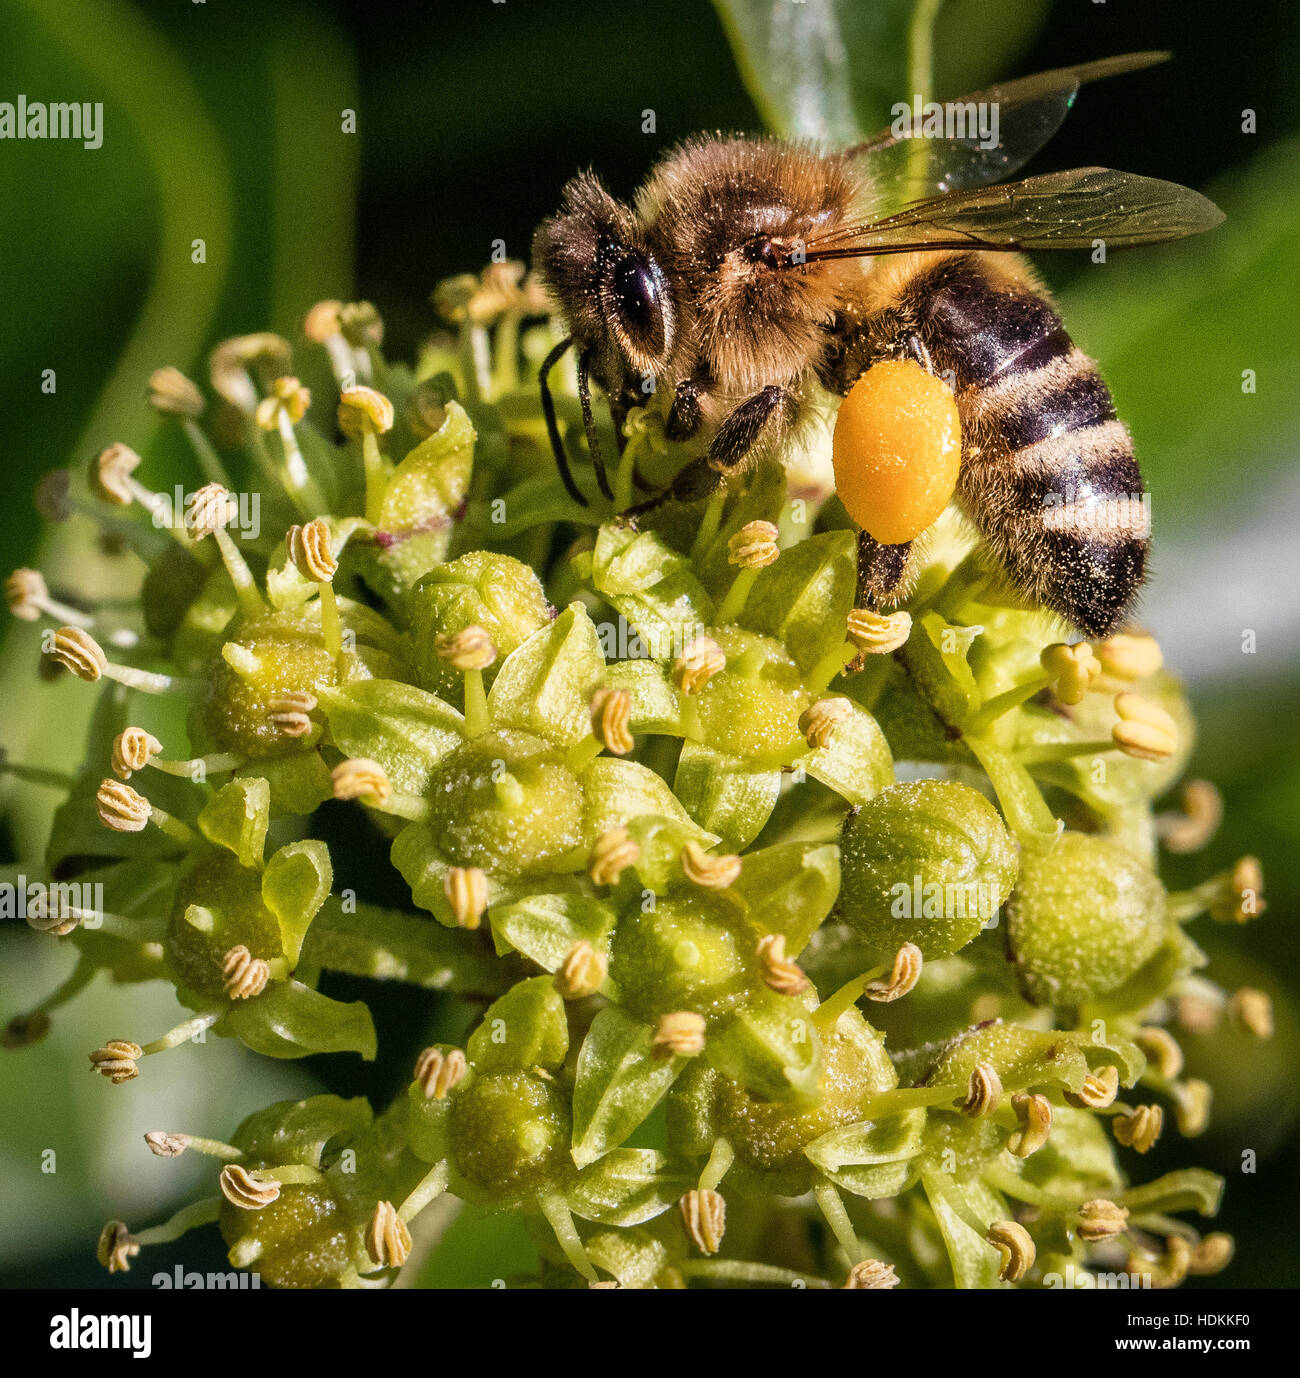 Western honey bee Apis mellifera feeding and collecting pollen from ivy flowers Stock Photo